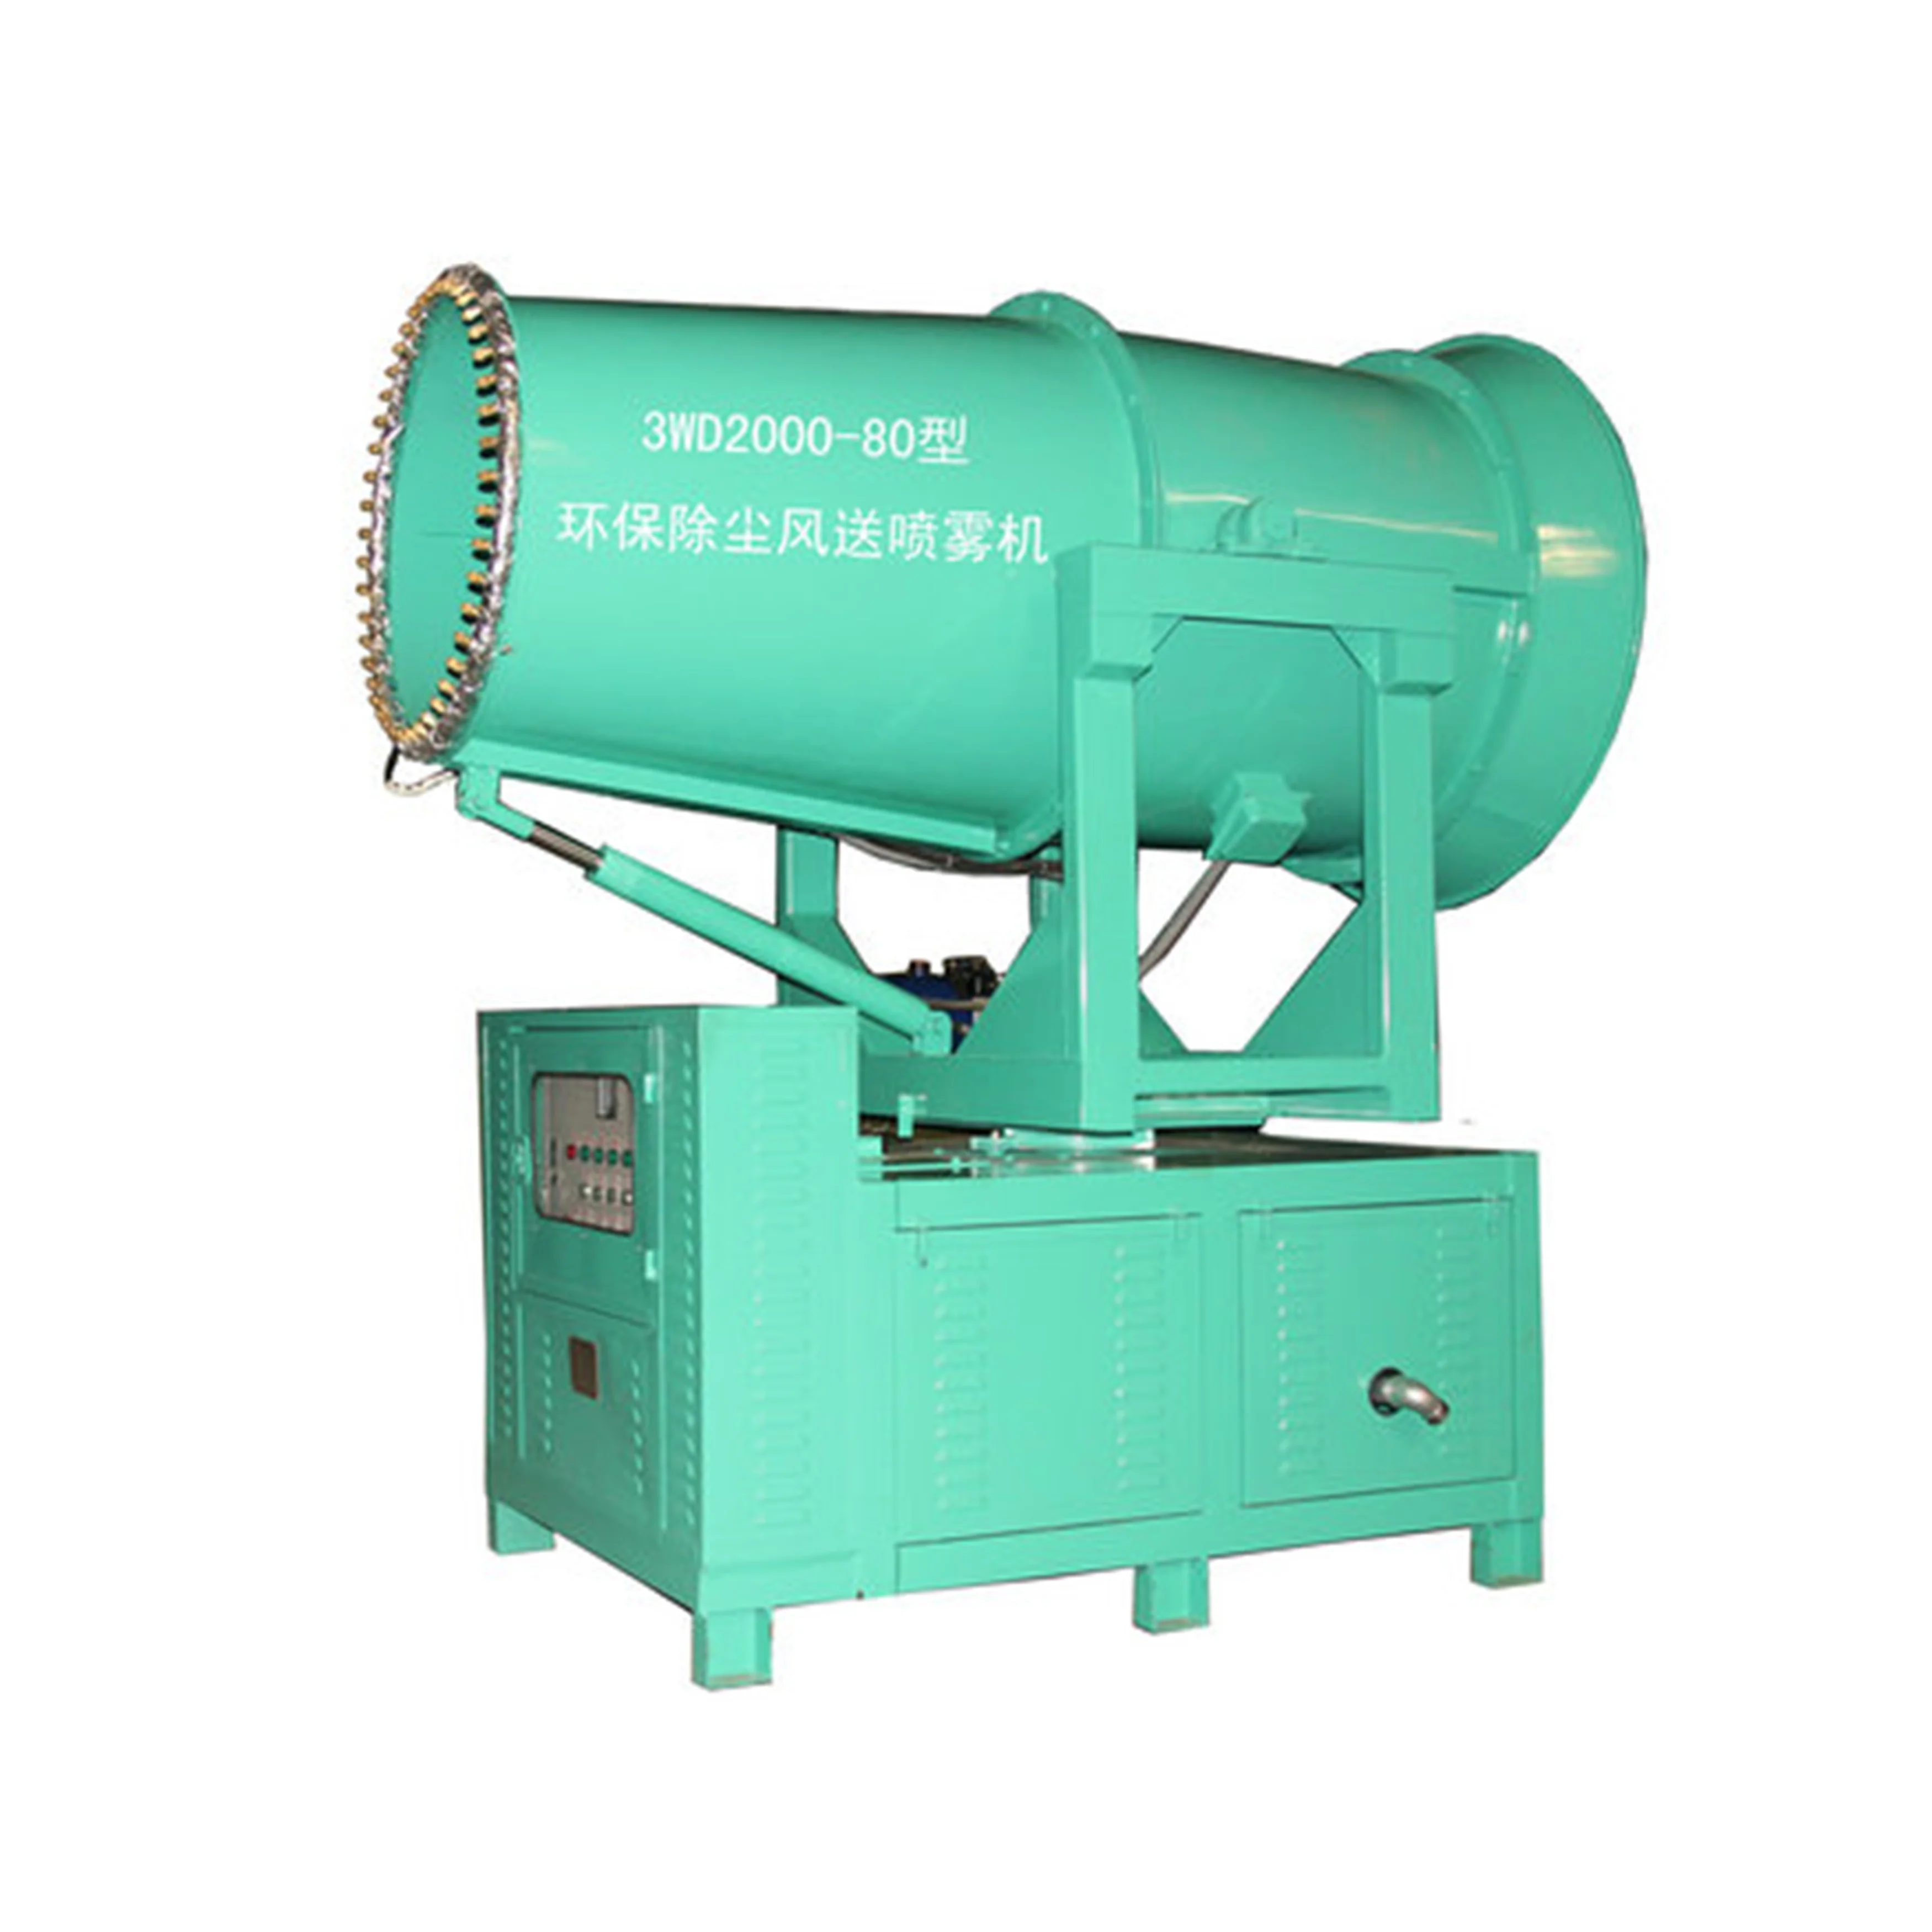 2022 Fenghua factory CE certificate dust suppression cannon dust problem and air pollution/cooling